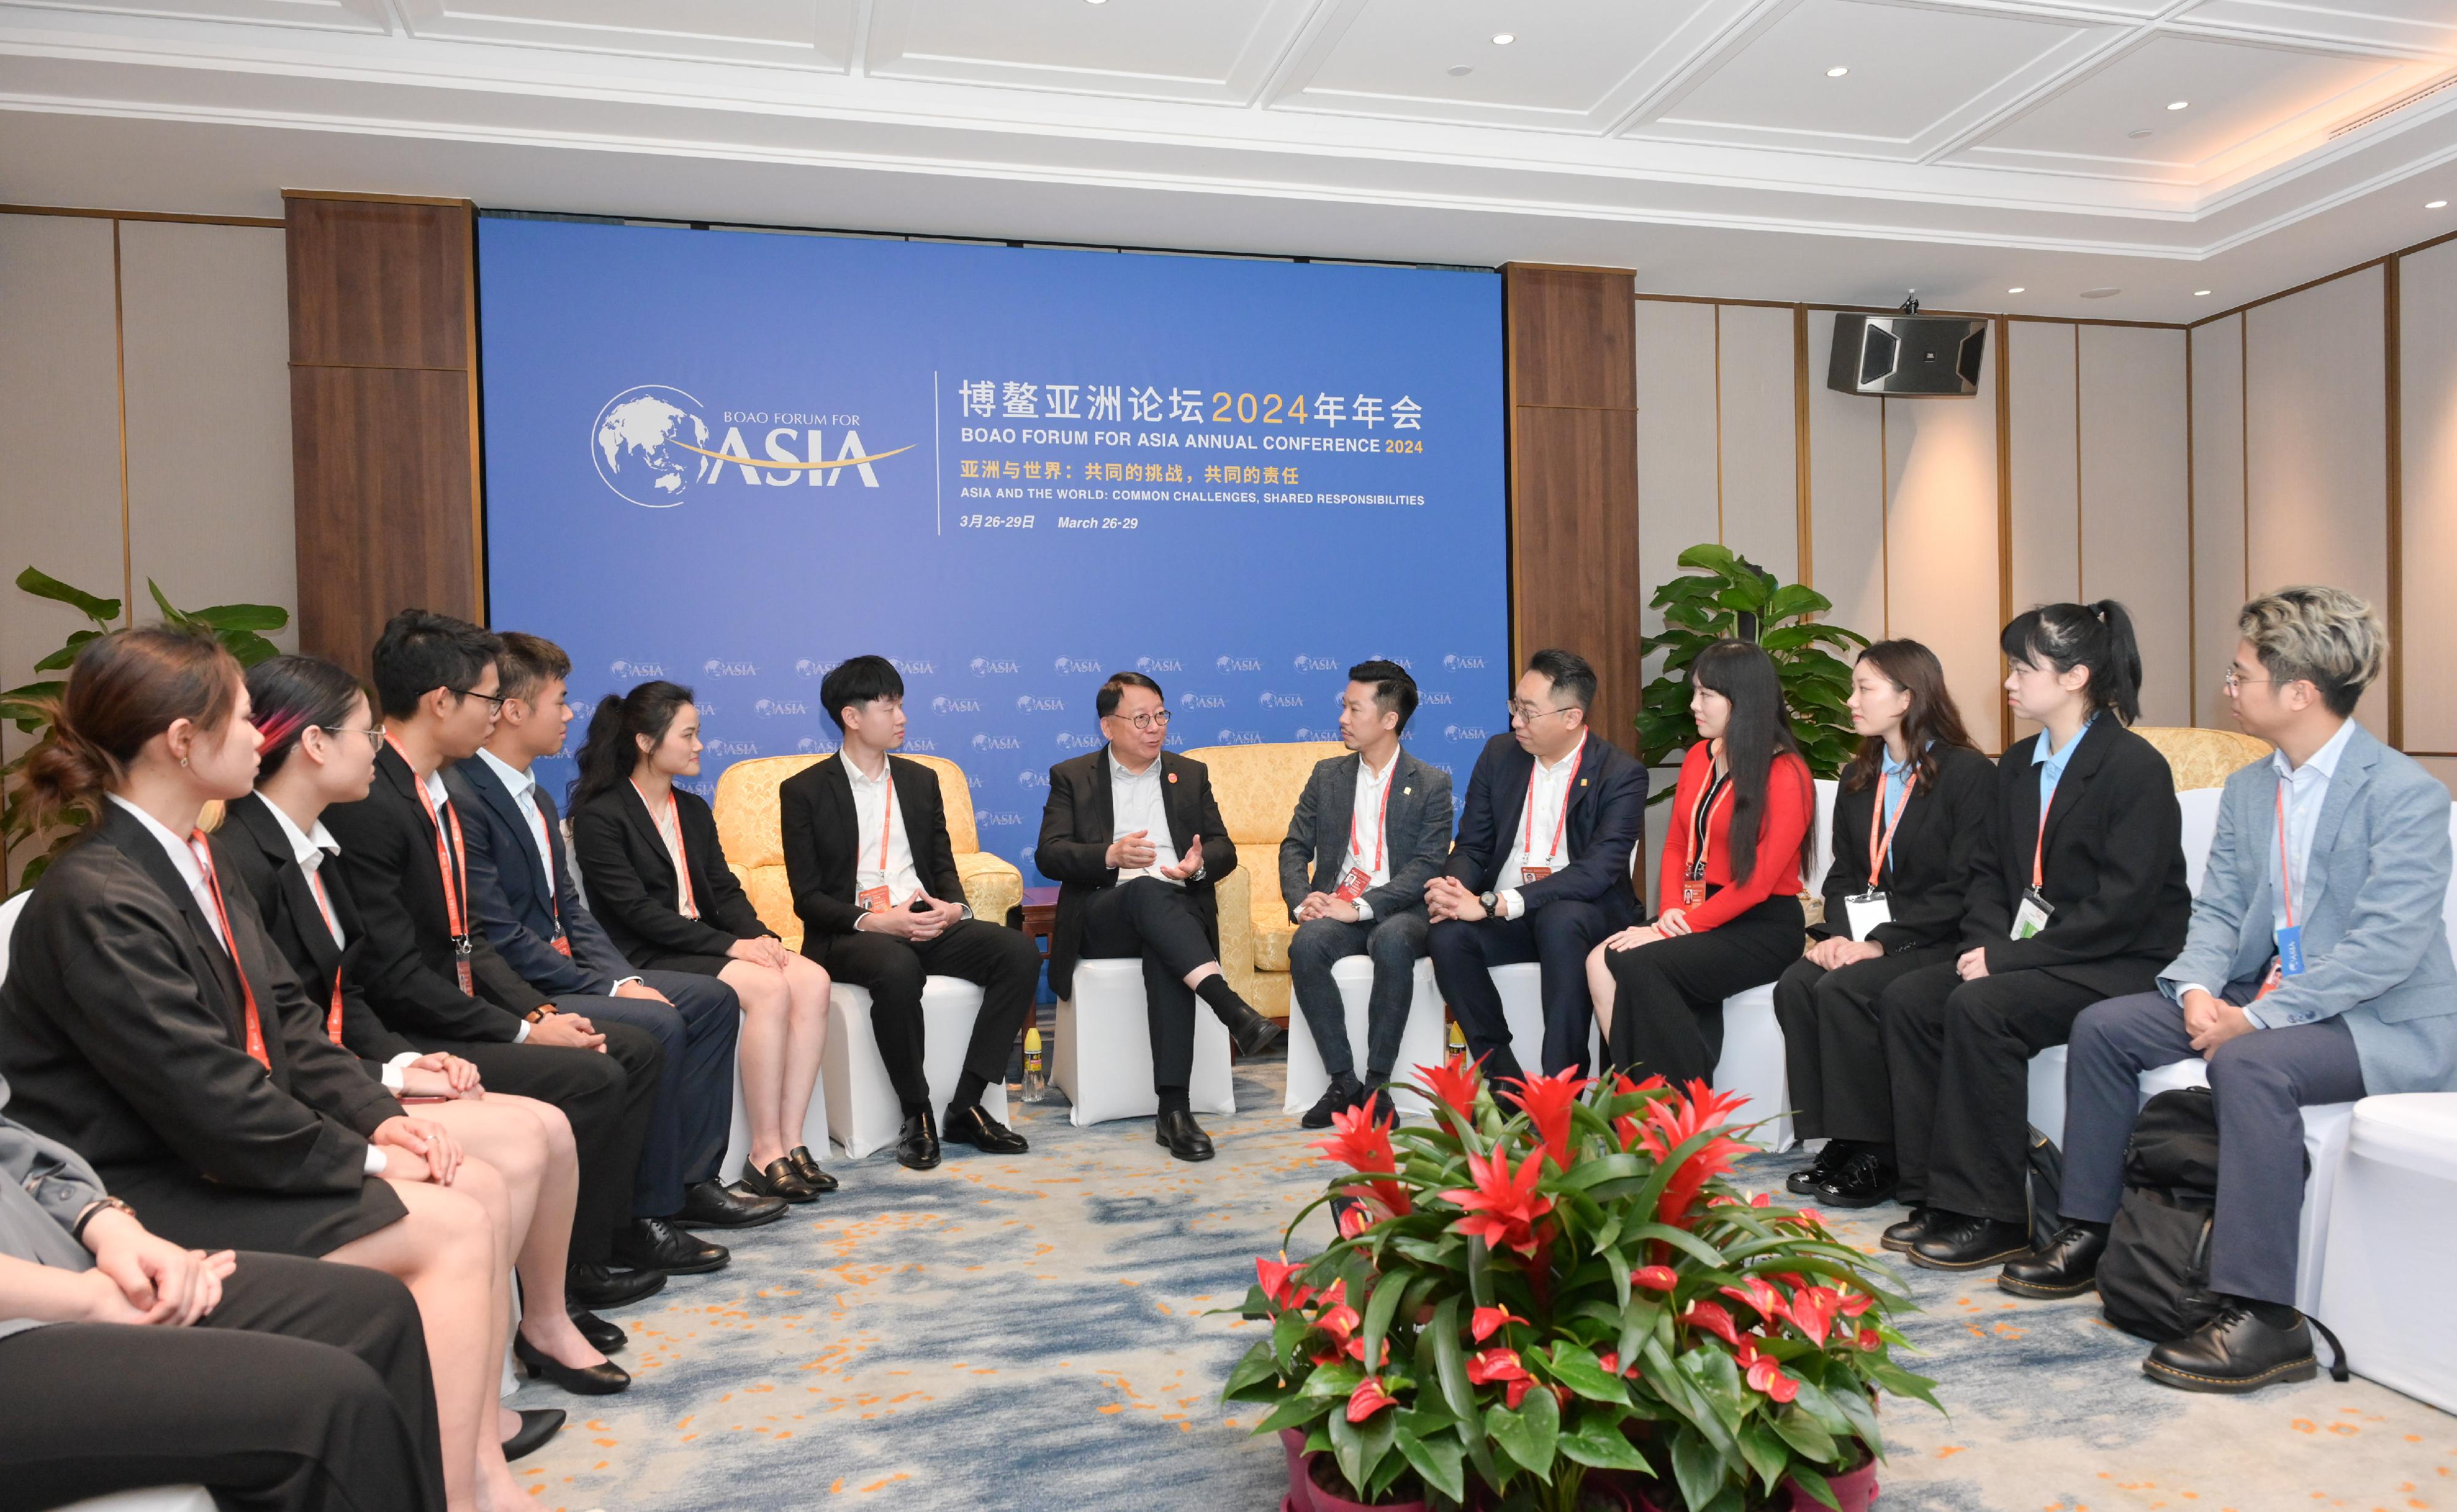 The Chief Secretary for Administration, Mr Chan Kwok-ki, met with the Hong Kong youth serving as volunteers at the Boao Forum for Asia Annual Conference 2024 in Hainan today (March 27). Photo shows Mr Chan (centre) interacting with the Chairman of the Y. Elites Association, Mr Lawrence Lam (sixth right); the Executive Deputy Chairman of the Y. Elites Association, Mr Jason Wong (fifth right) and the Hong Kong youth volunteers, to understand their work and views.